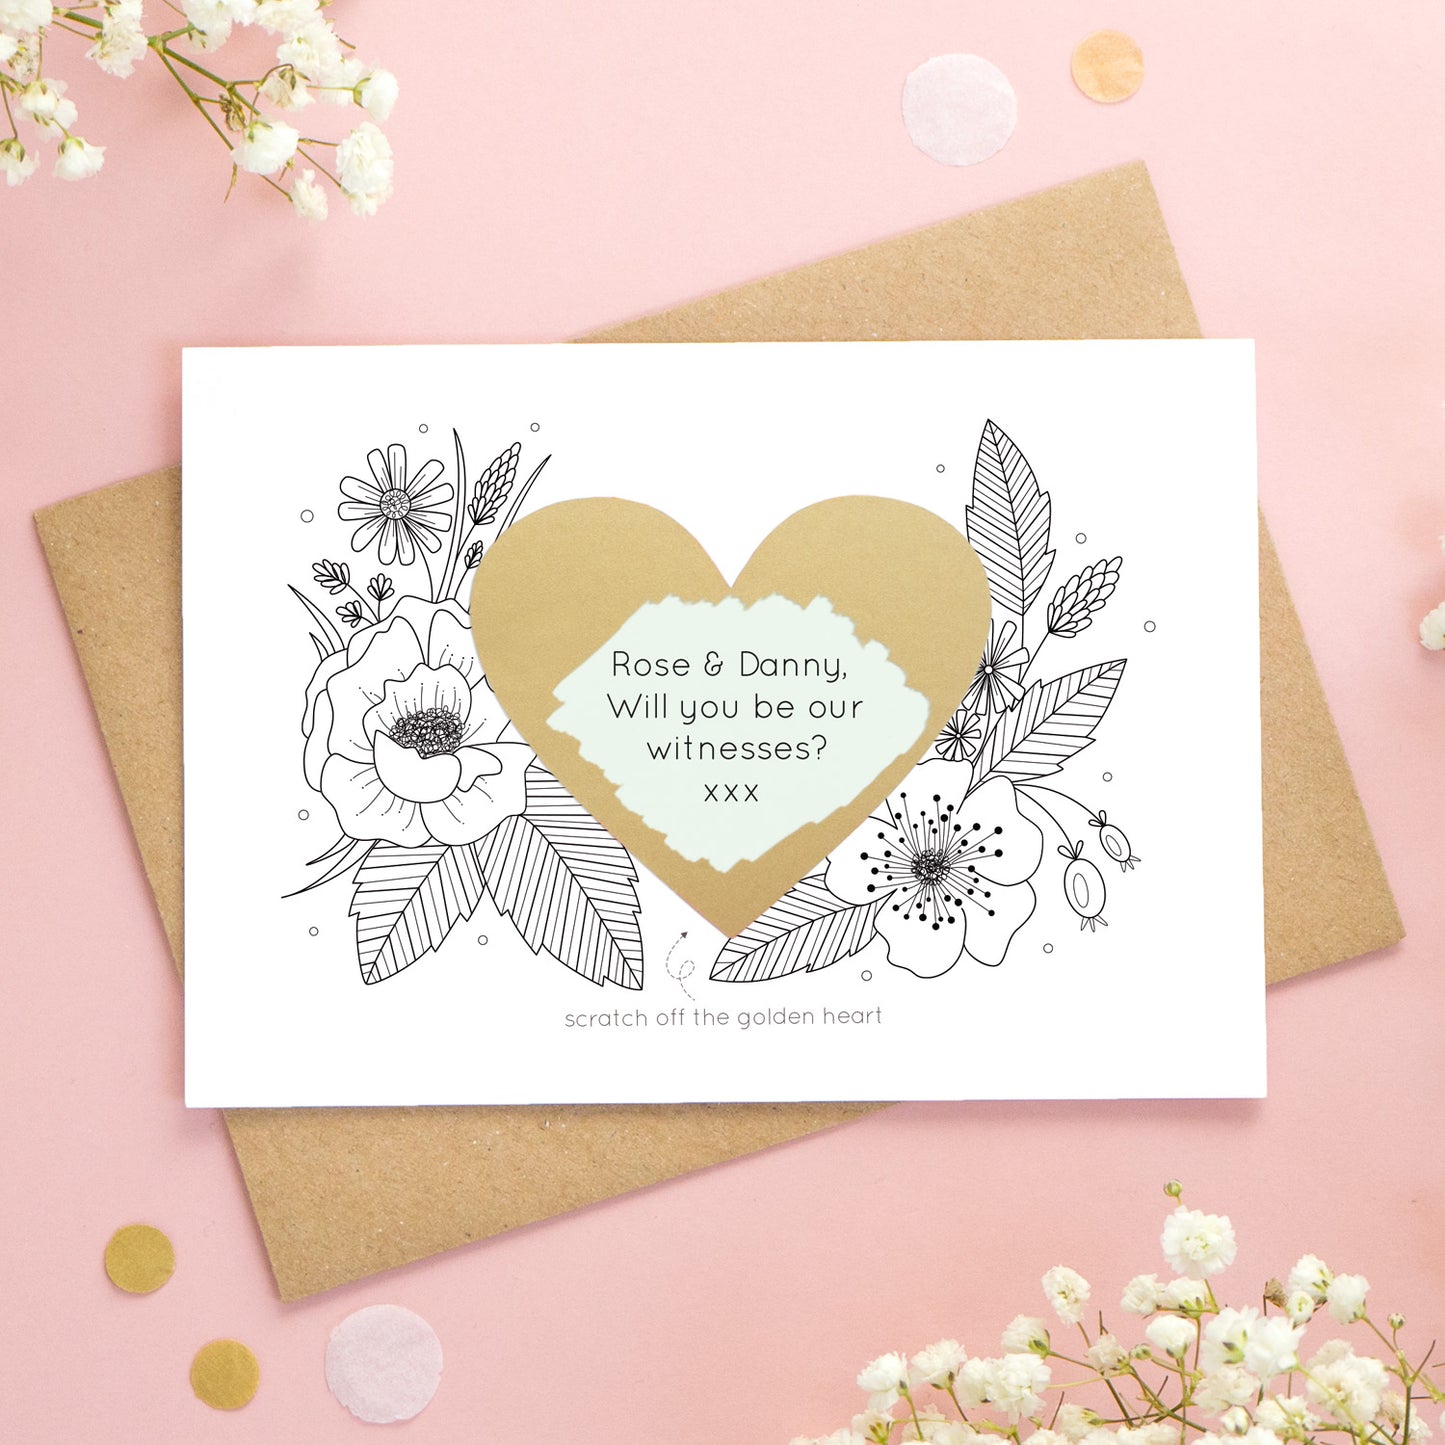 A personalised wedding scratch card shot on a pink background with white flowers. The golden heart has been scratched revealing a green heart and a witness proposal!